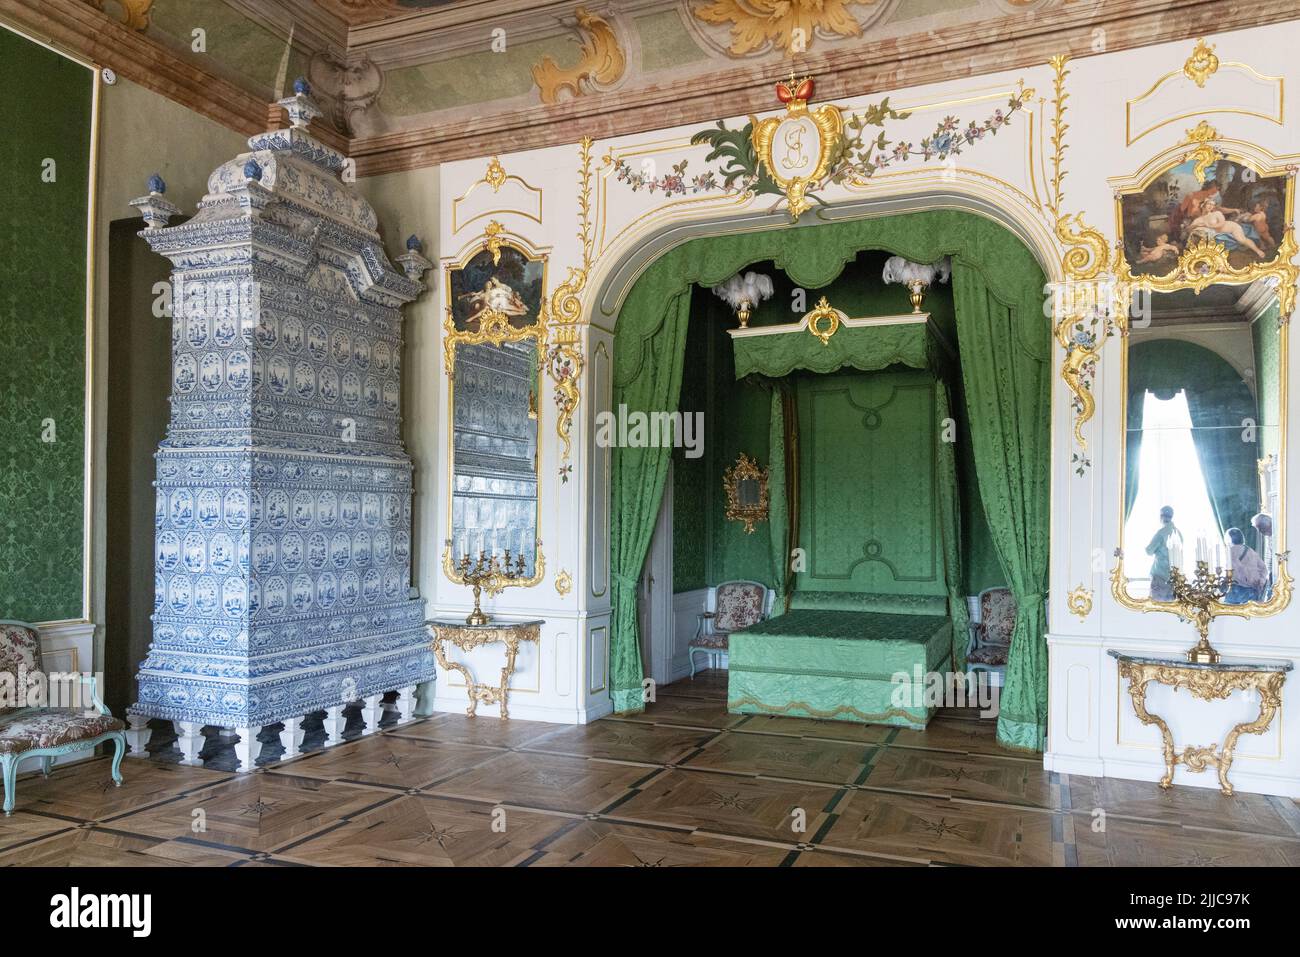 Rundale Palace Latvia, a restored 18th century Baroque architecture palace, interior, The State bedroom of the Duke of Courland Stock Photo